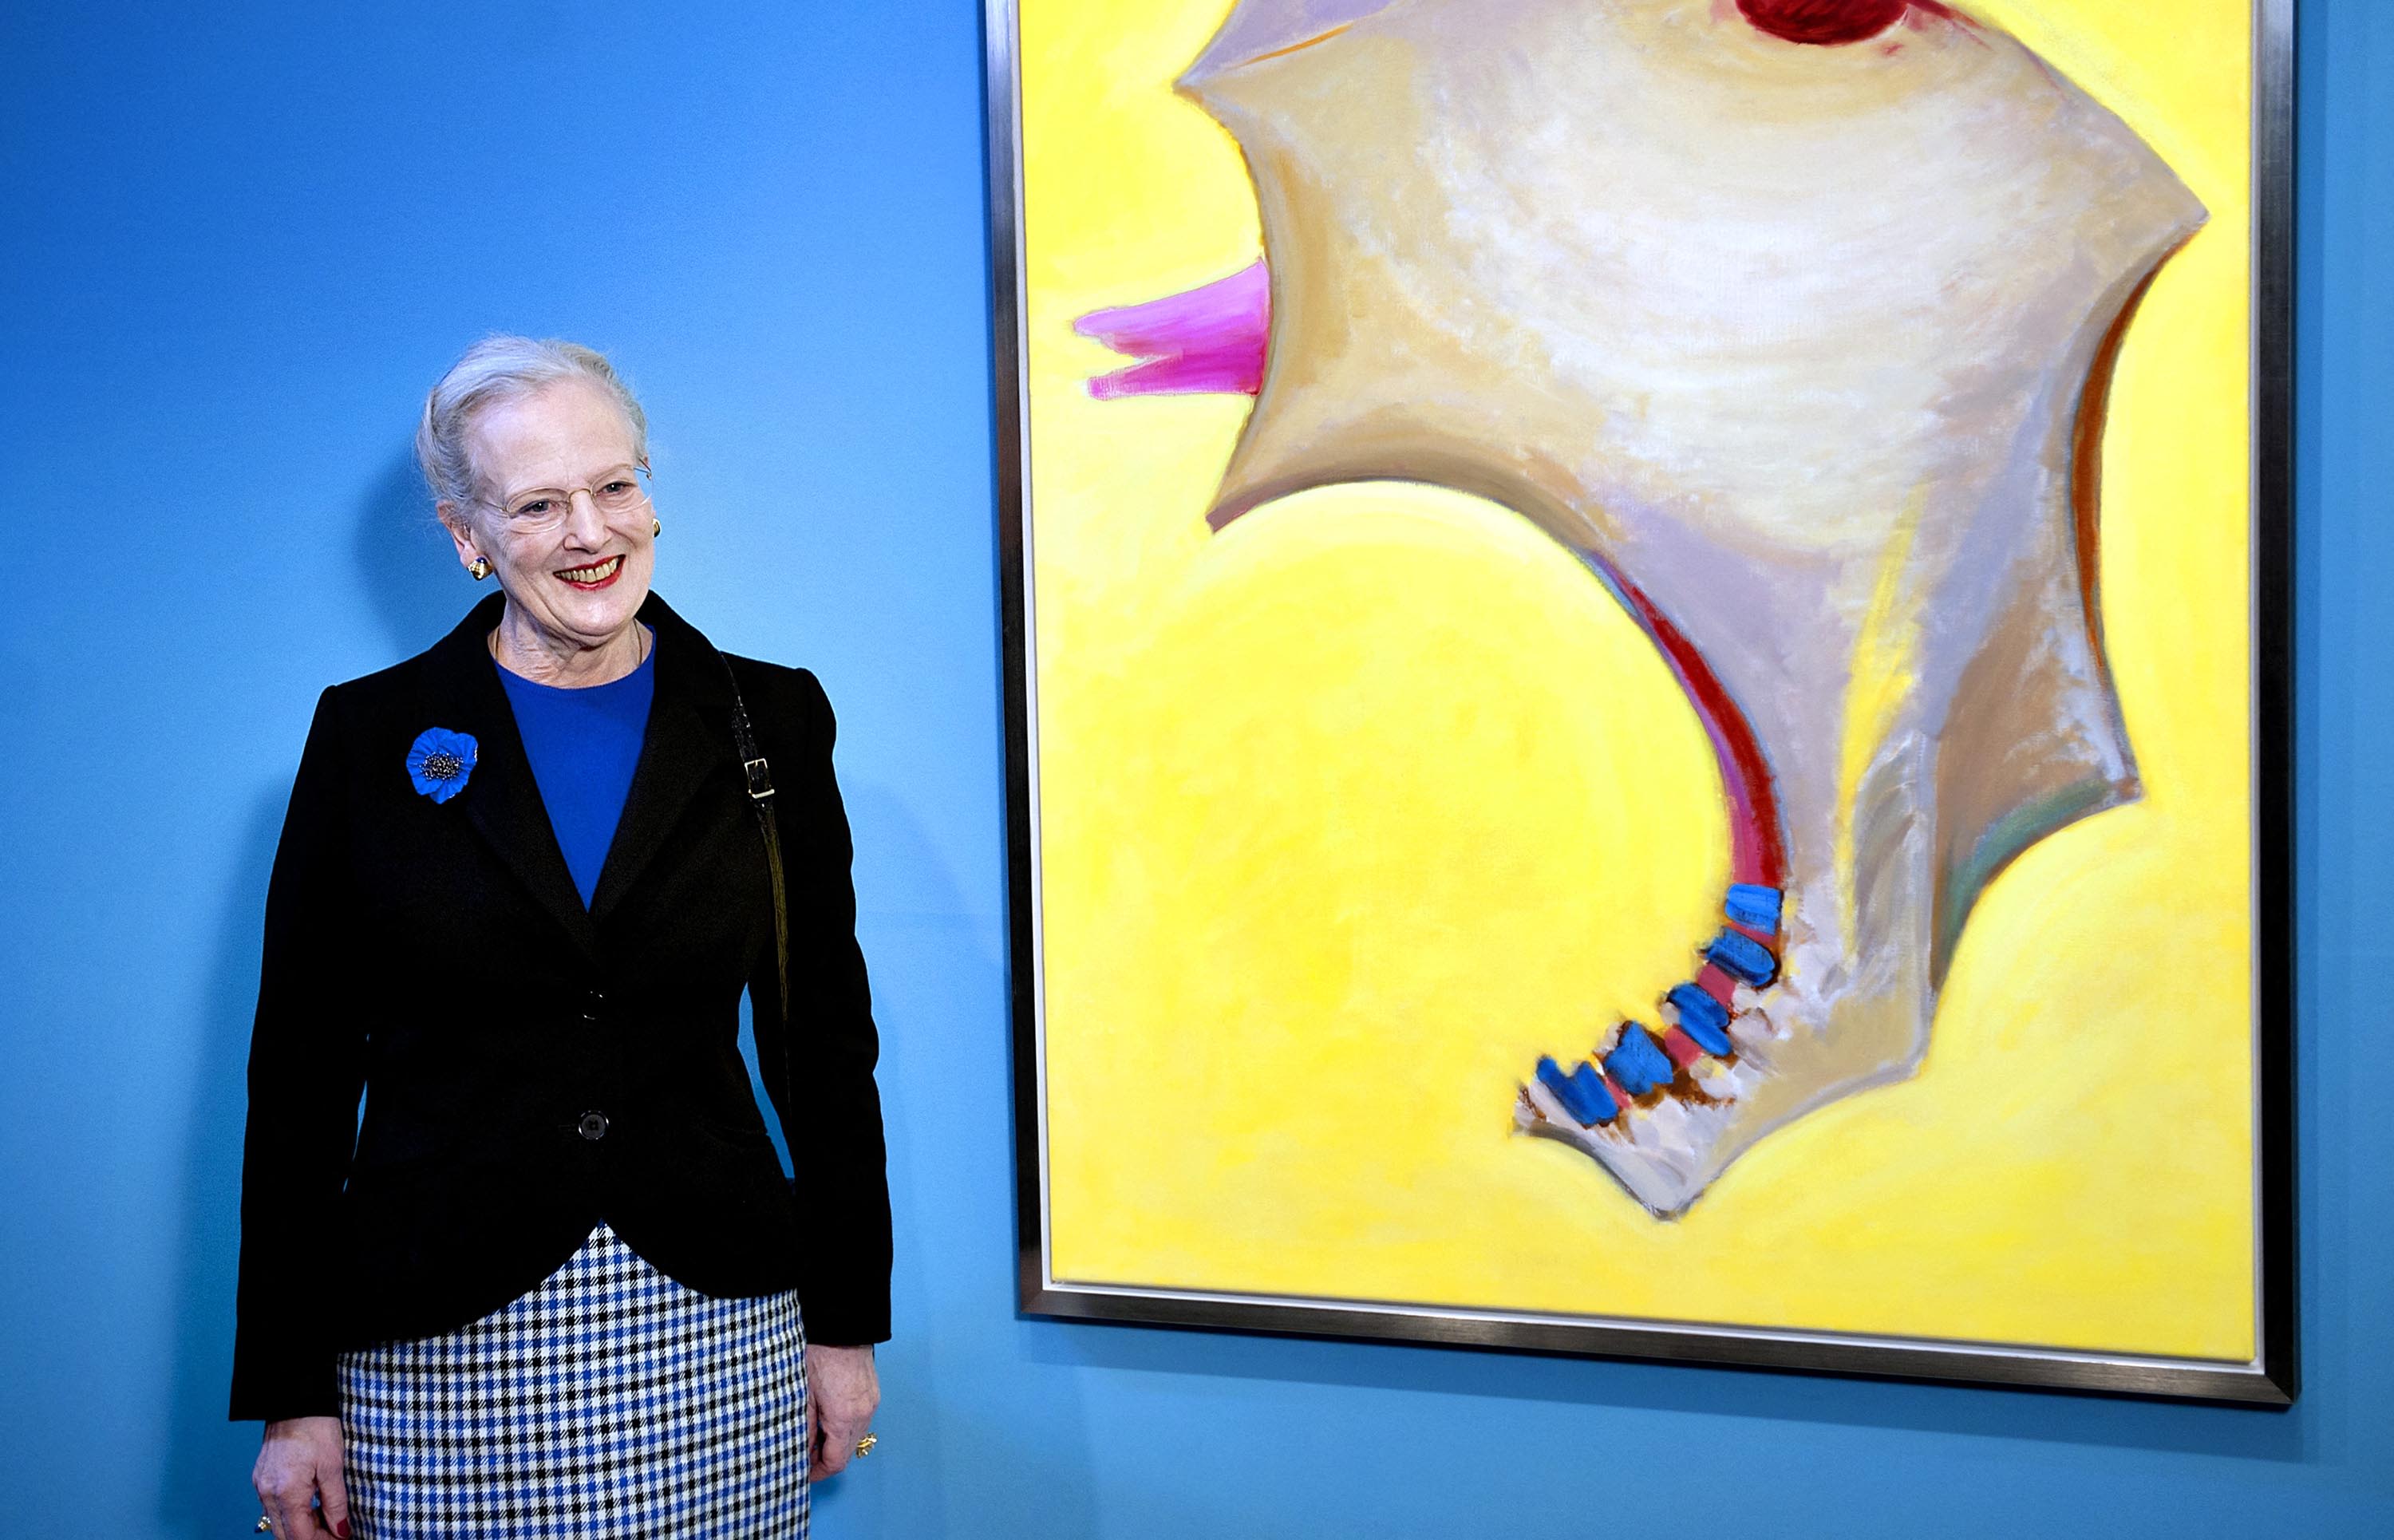 Queen Margrethe at an exhibition of her work in January 2012